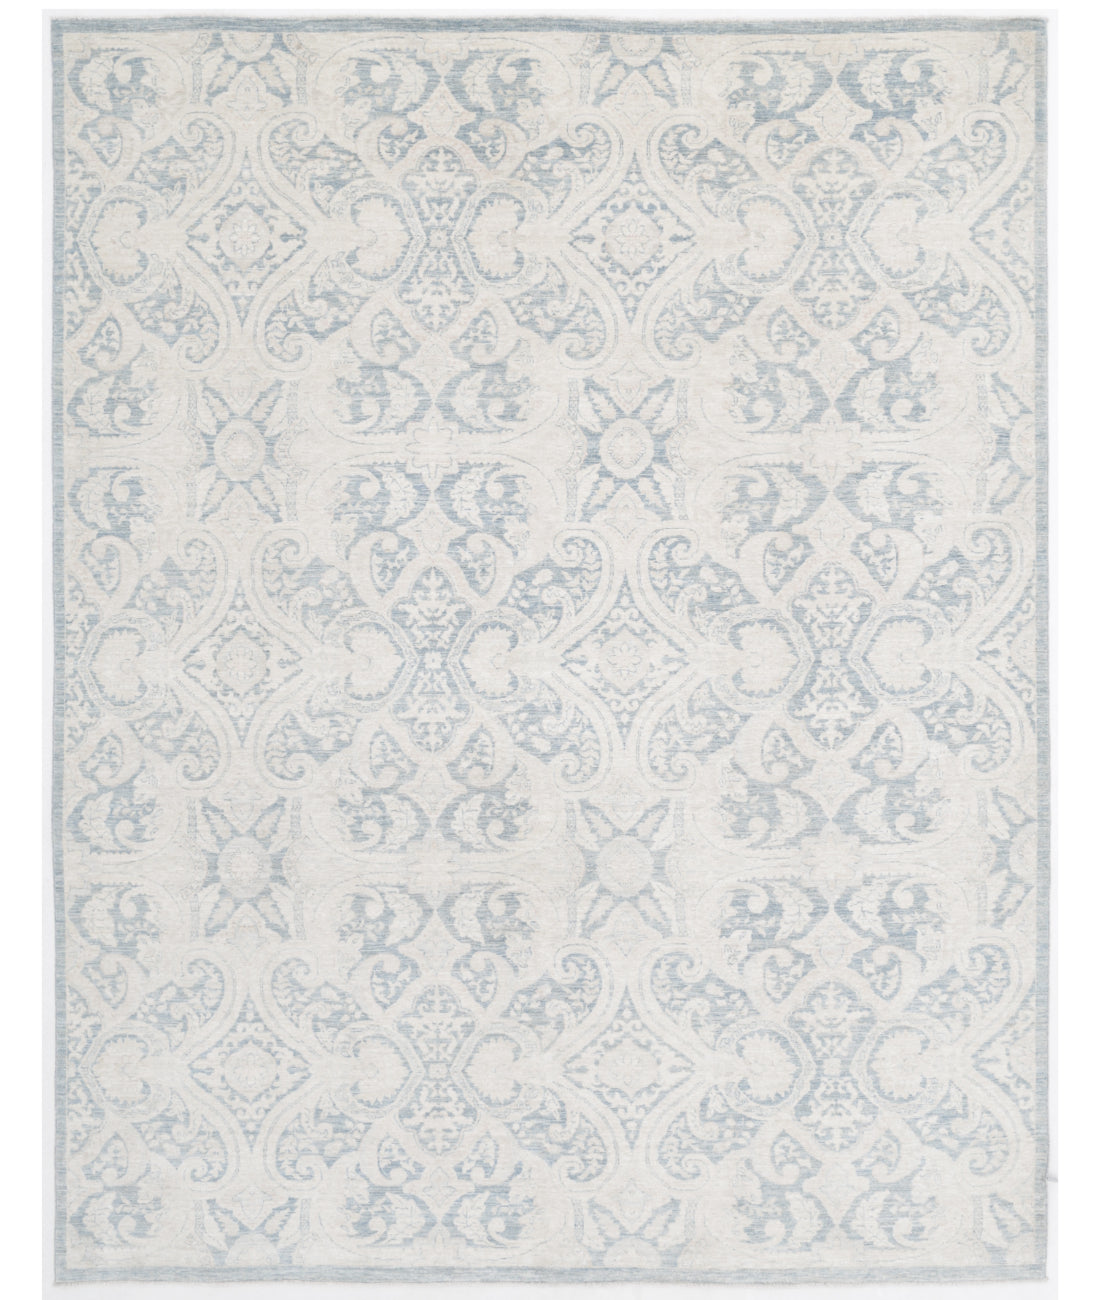 Hand Knotted Artemix Wool Rug - 7'10'' x 10'2'' 7'10'' x 10'2'' (235 X 305) / Blue / Ivory